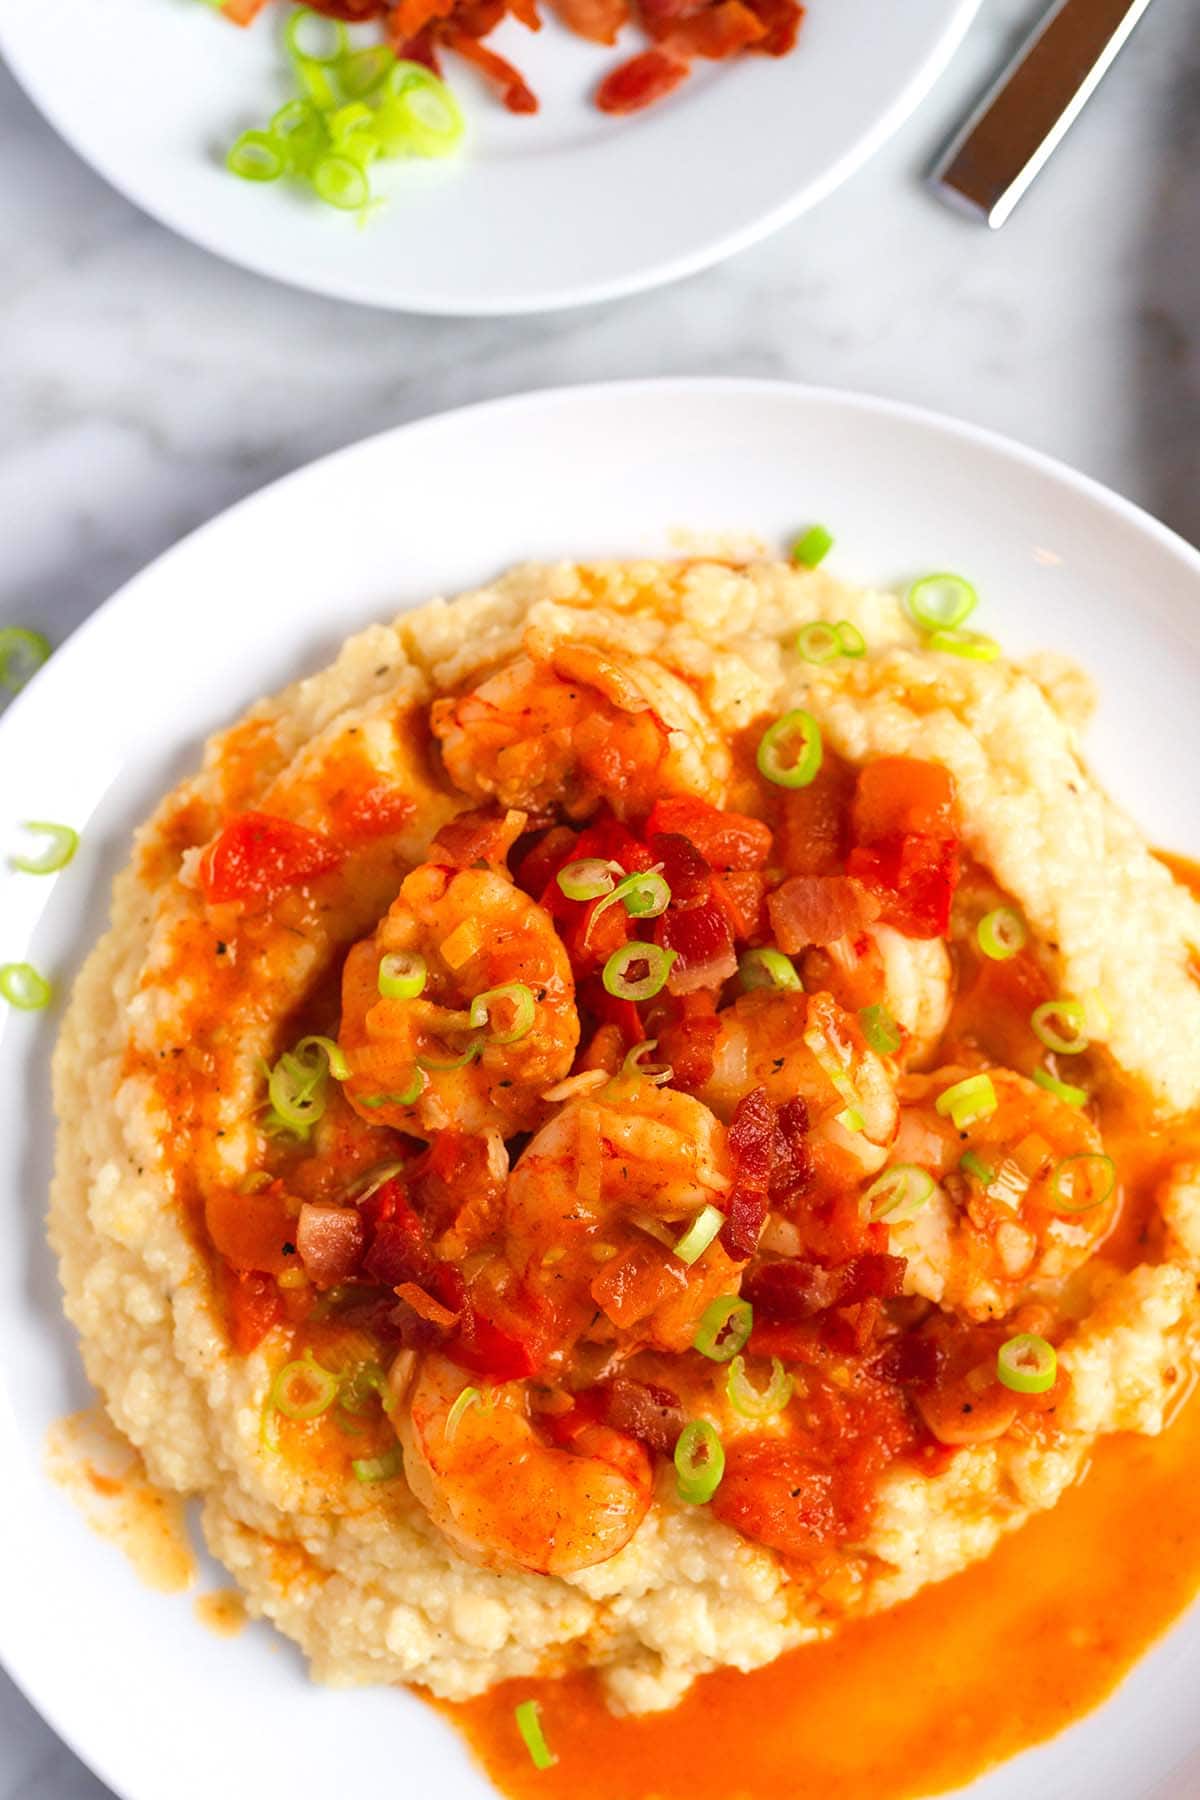 Easy Shrimp and Grits